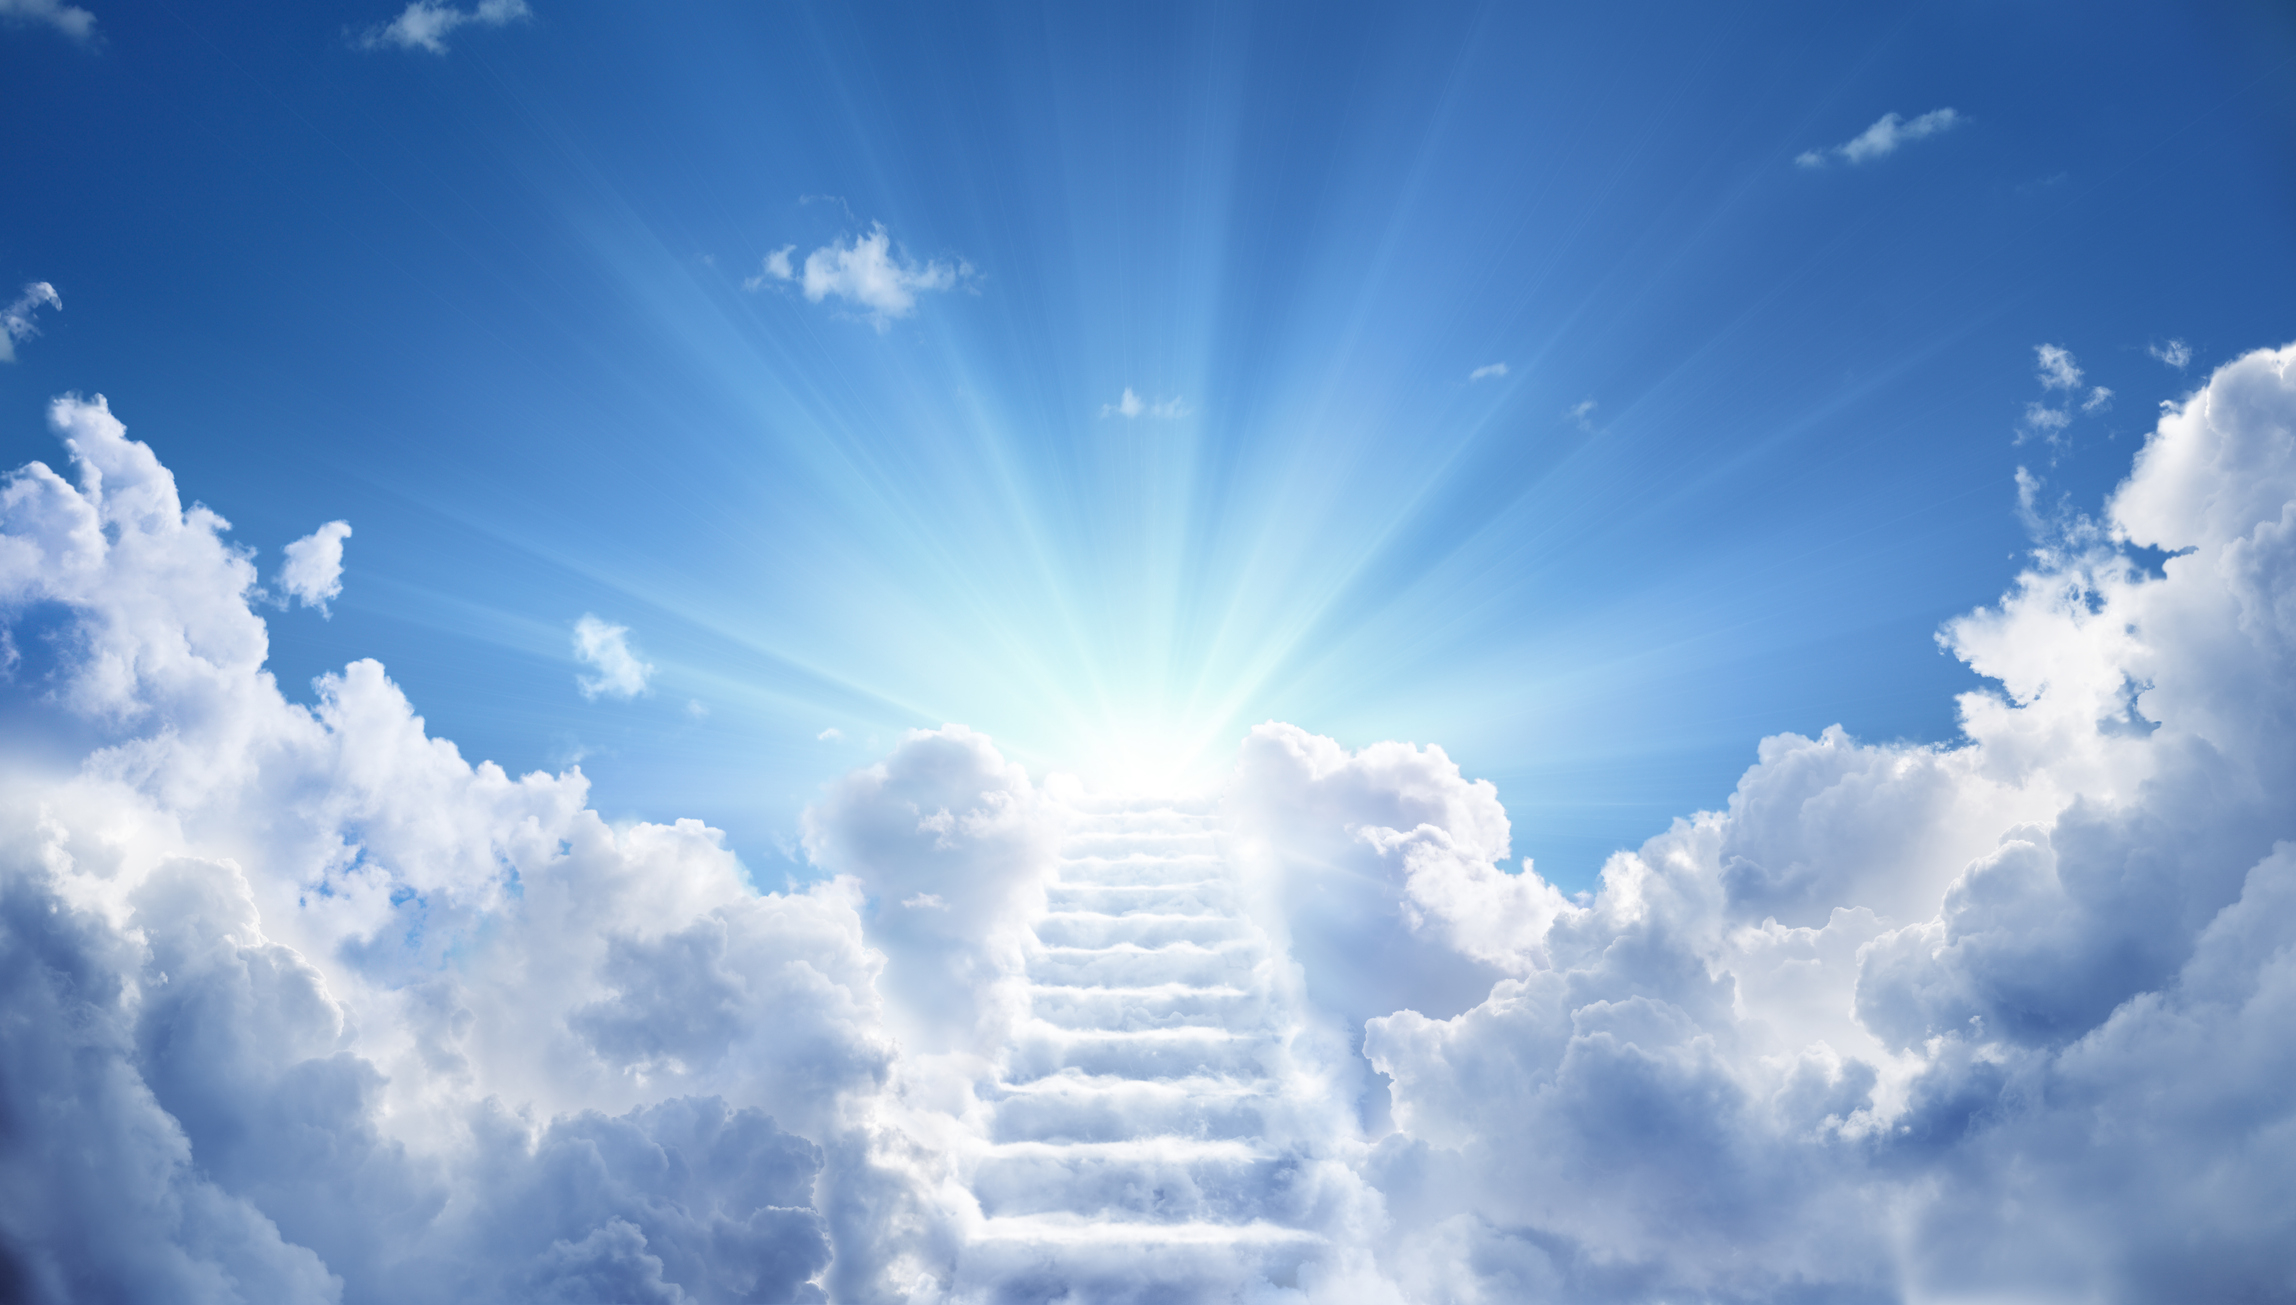 Clouds with sunbeams shining down, creating a staircase-like appearance in the sky